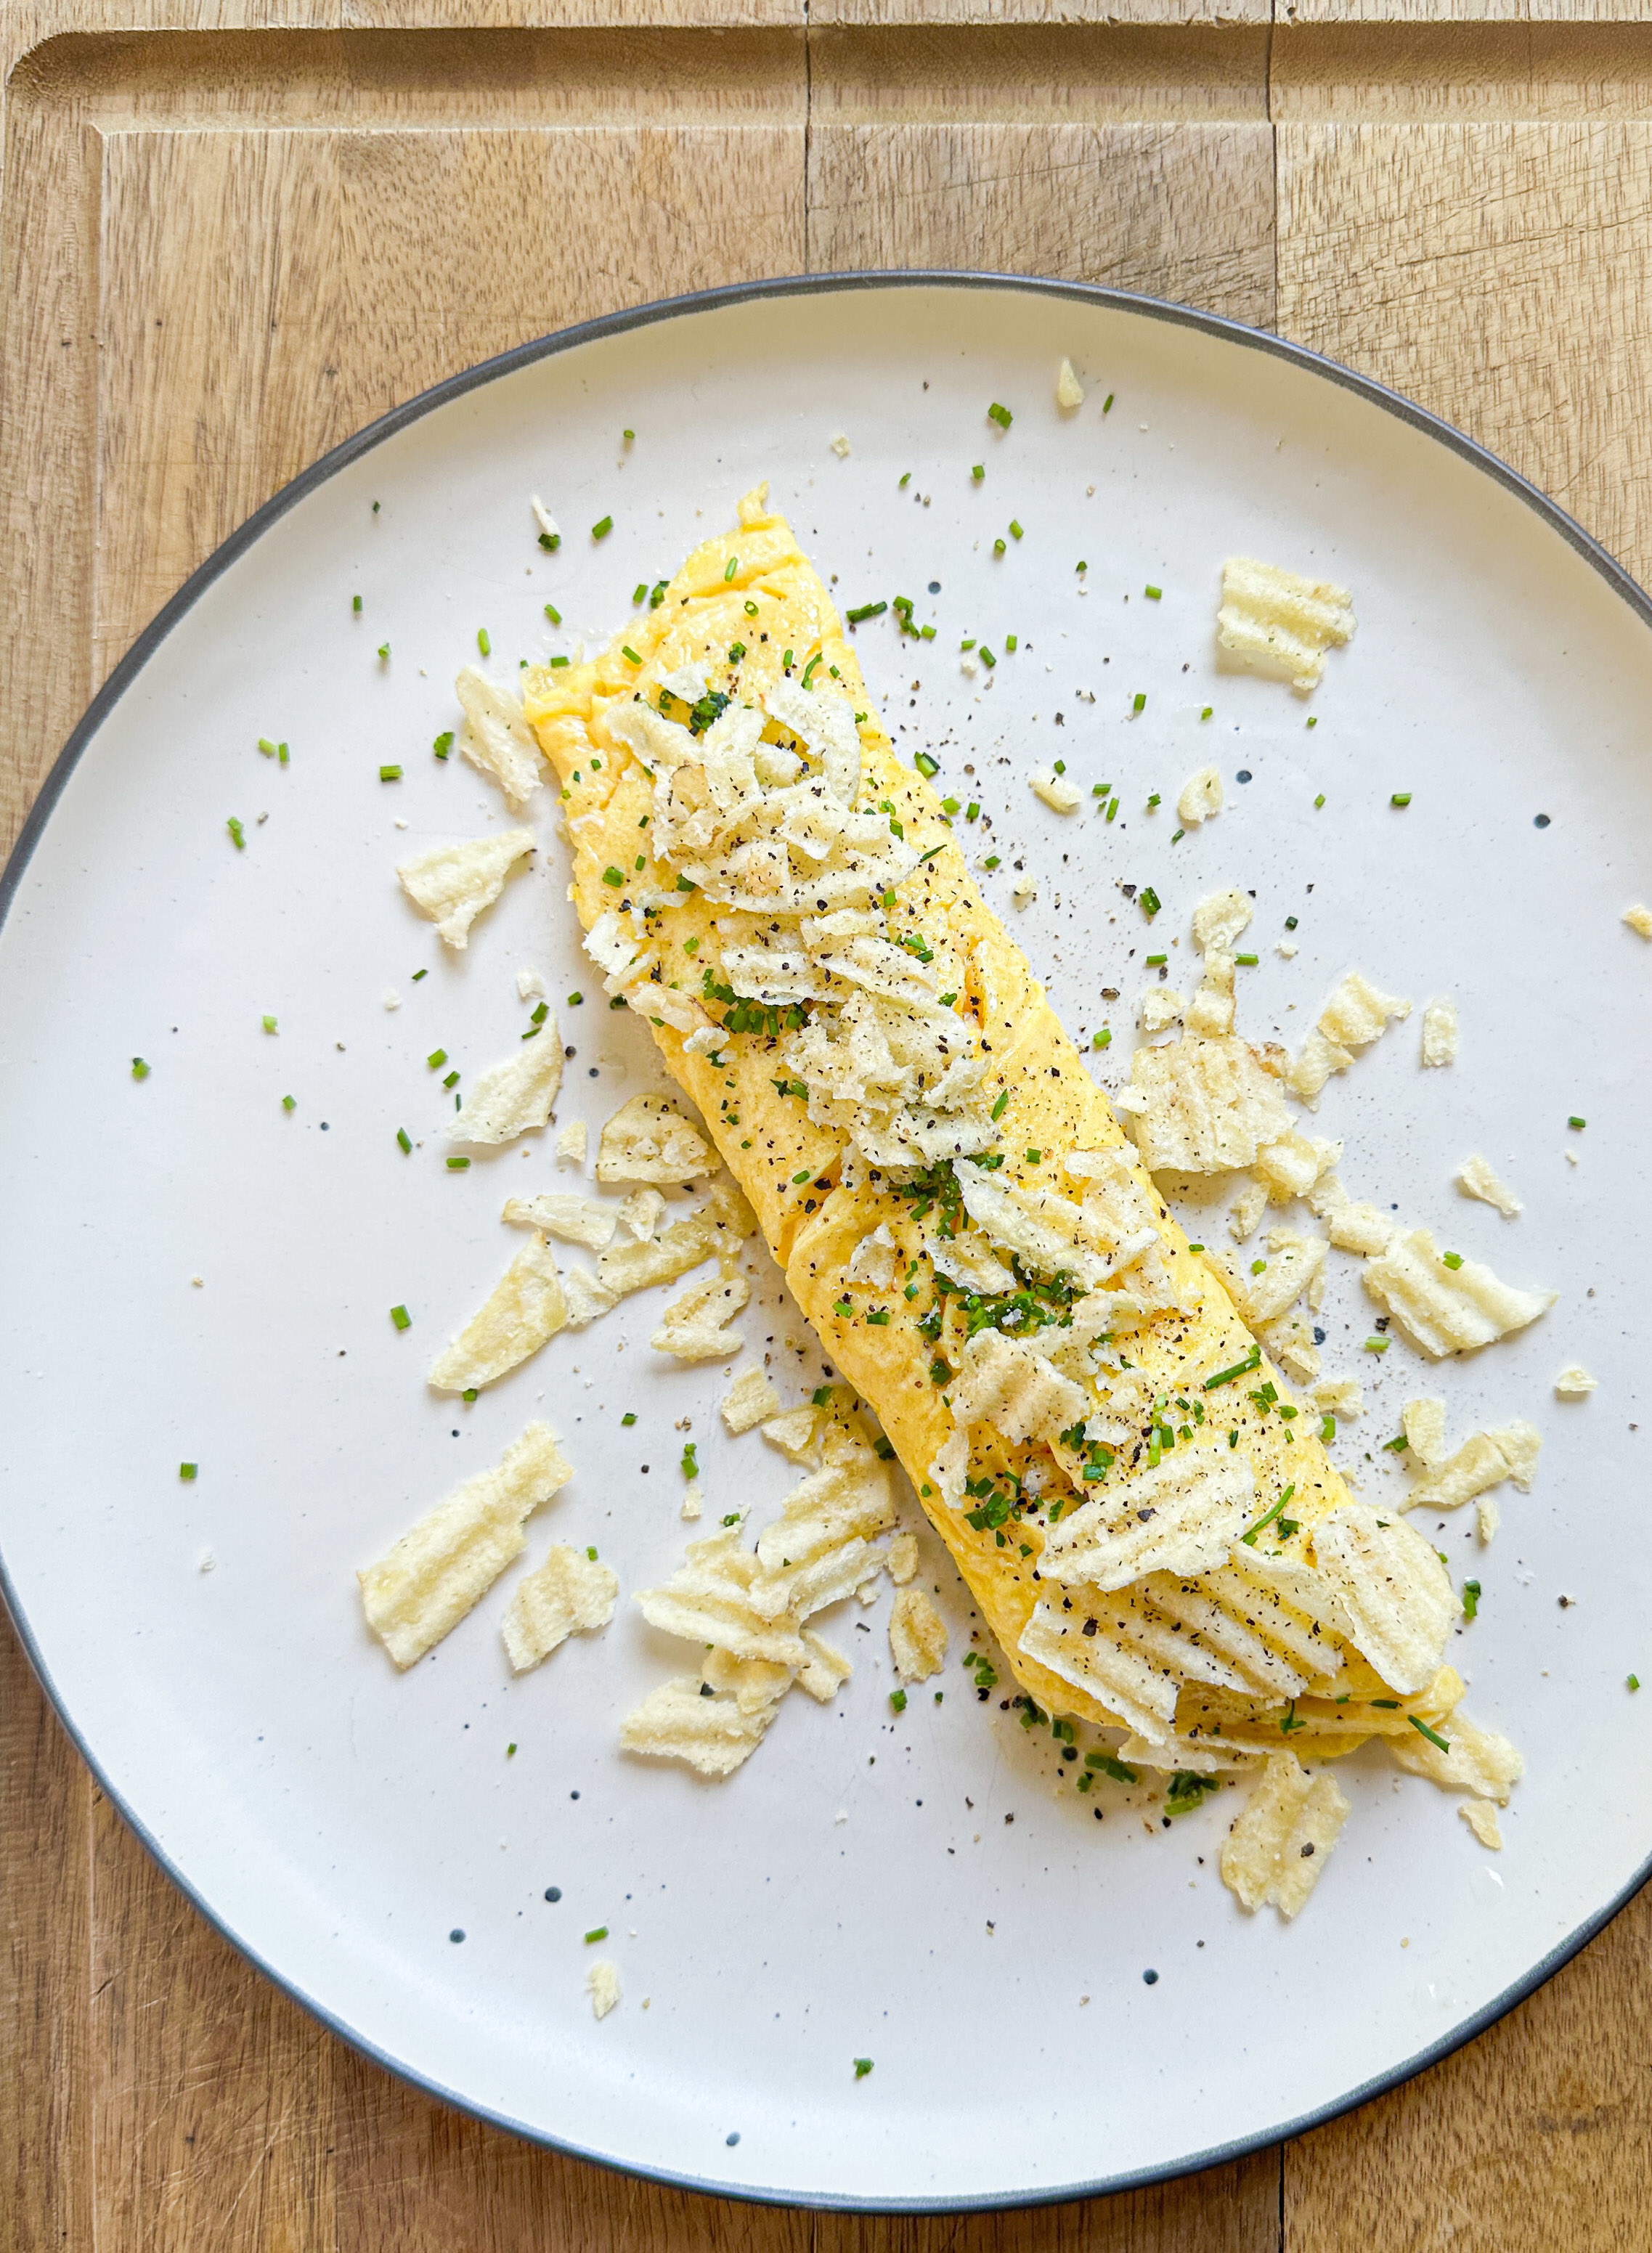 plated omelet garnished on a wooden cutting board